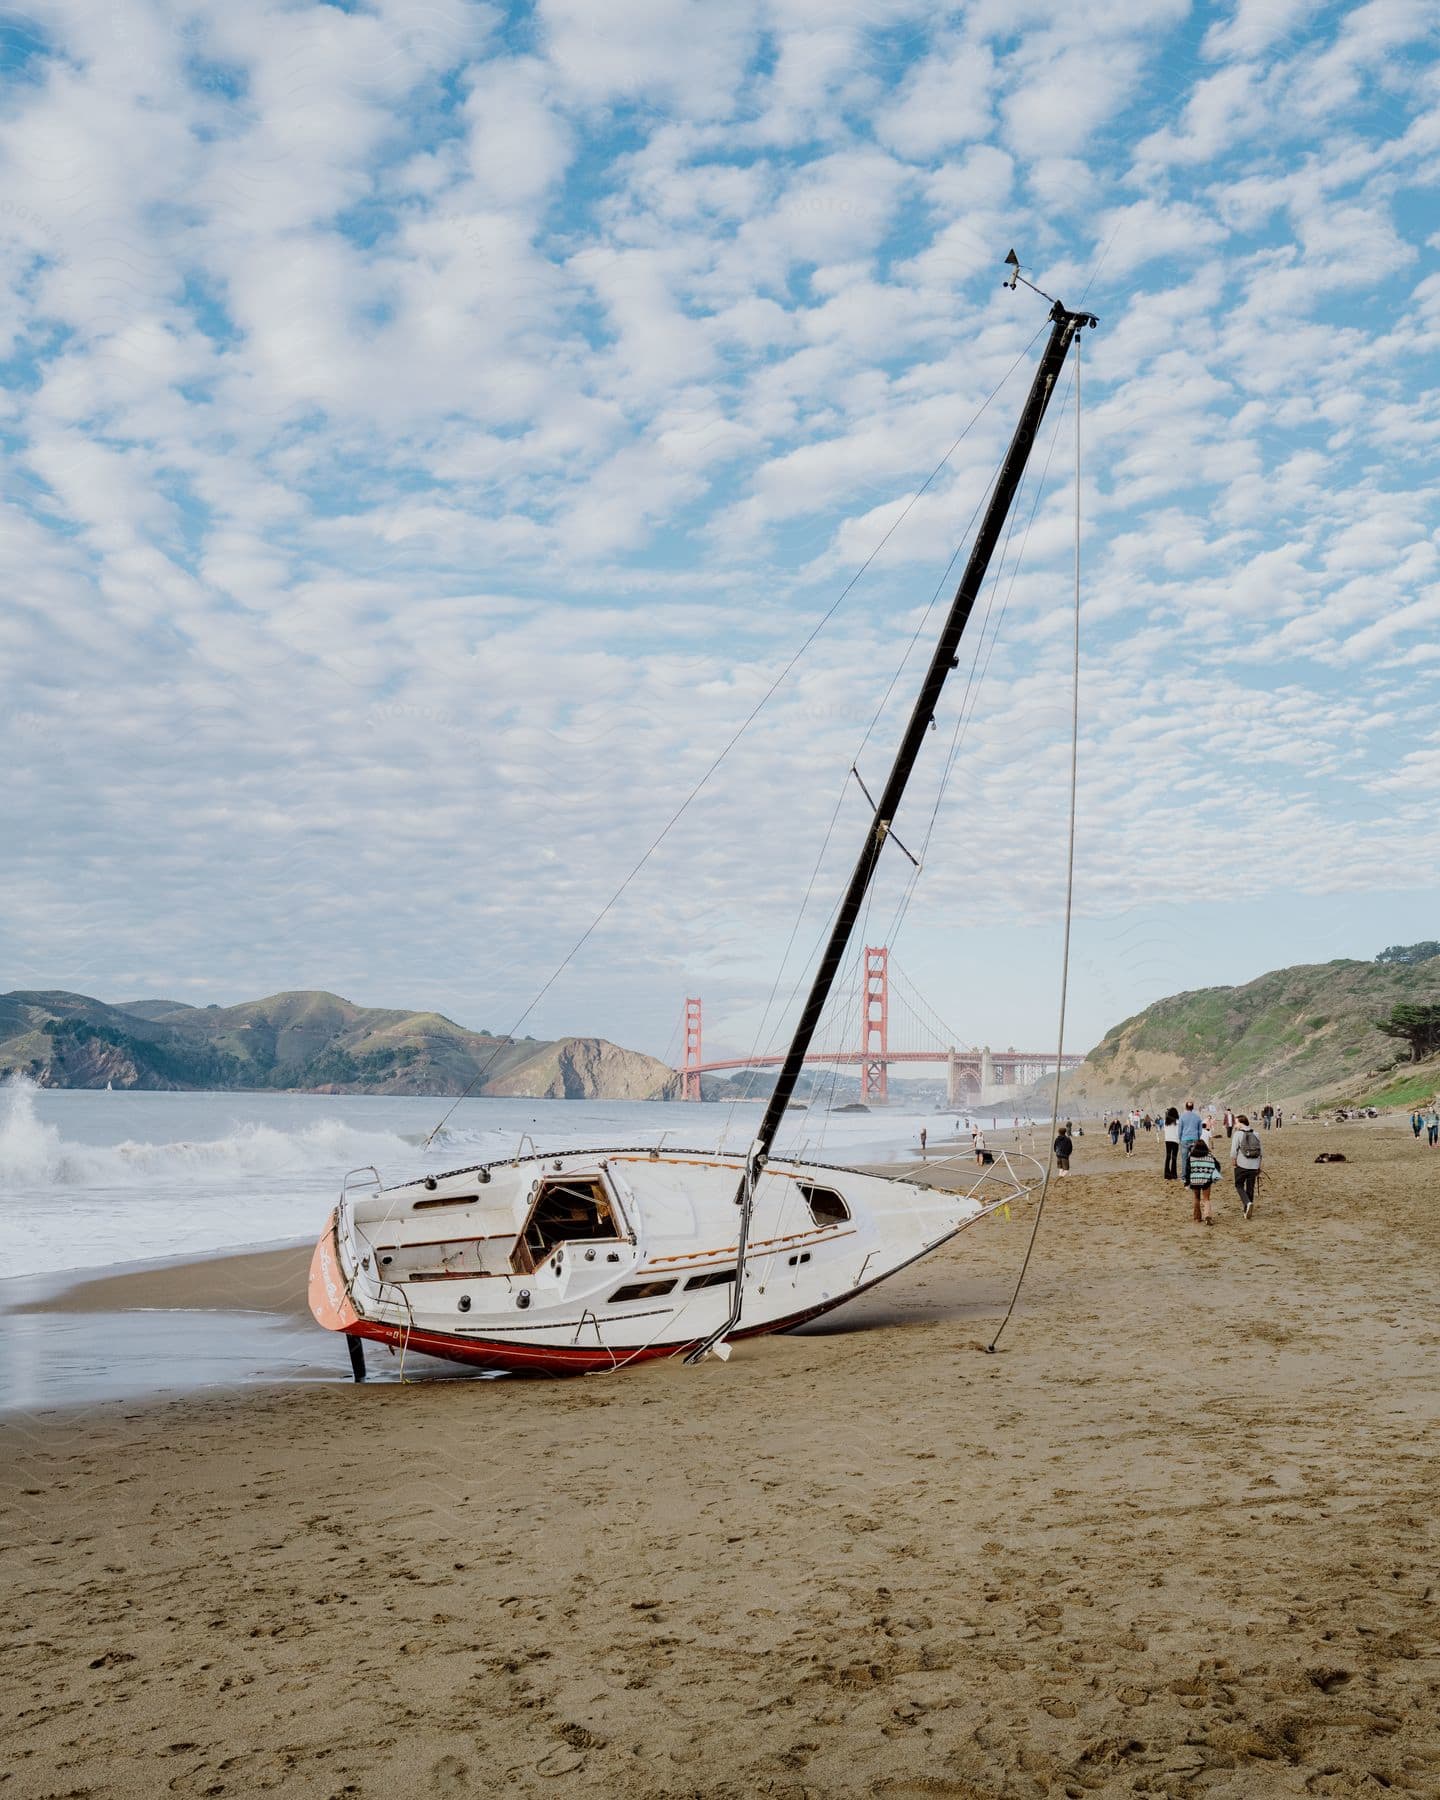 A beached sailboat with a tilted mast on a sandy beach with the Golden Gate Bridge in the background.